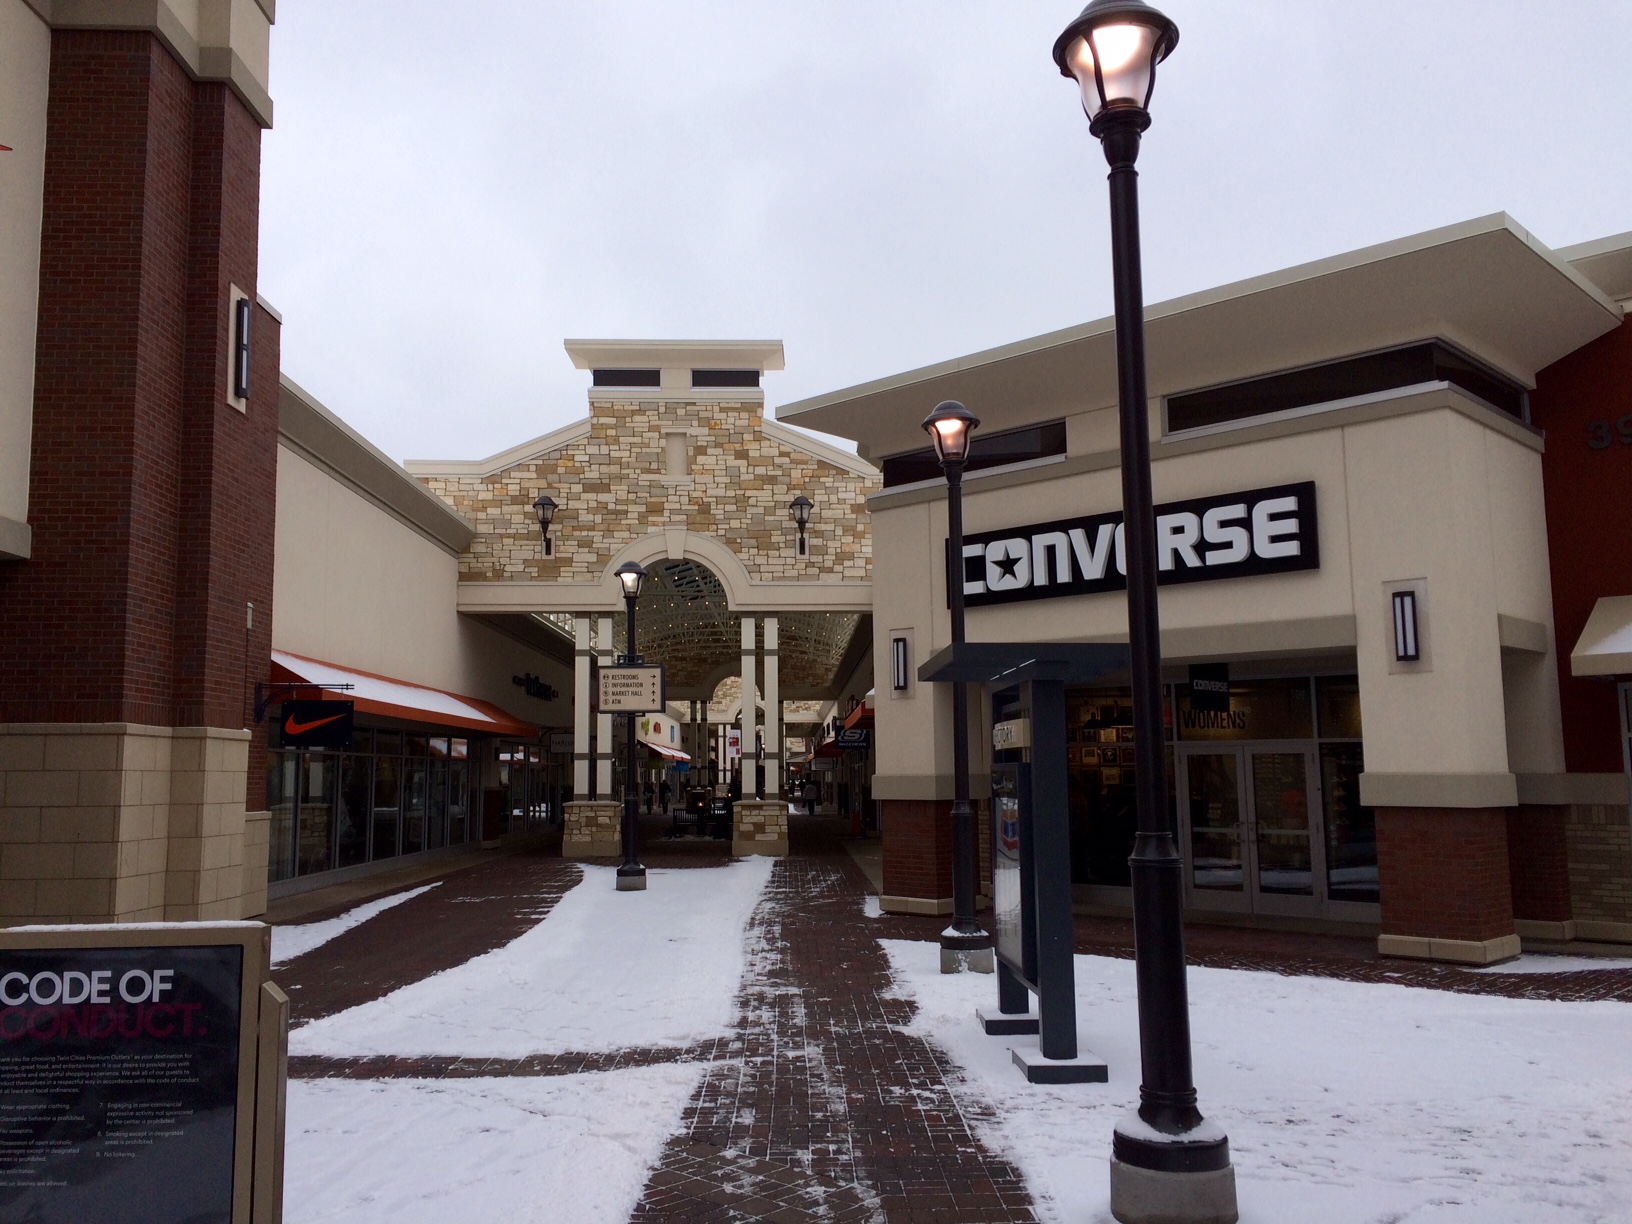 Shoplifting At Eagan Outlet Mall Puts Strain On Police – WCCO | CBS Minnesota